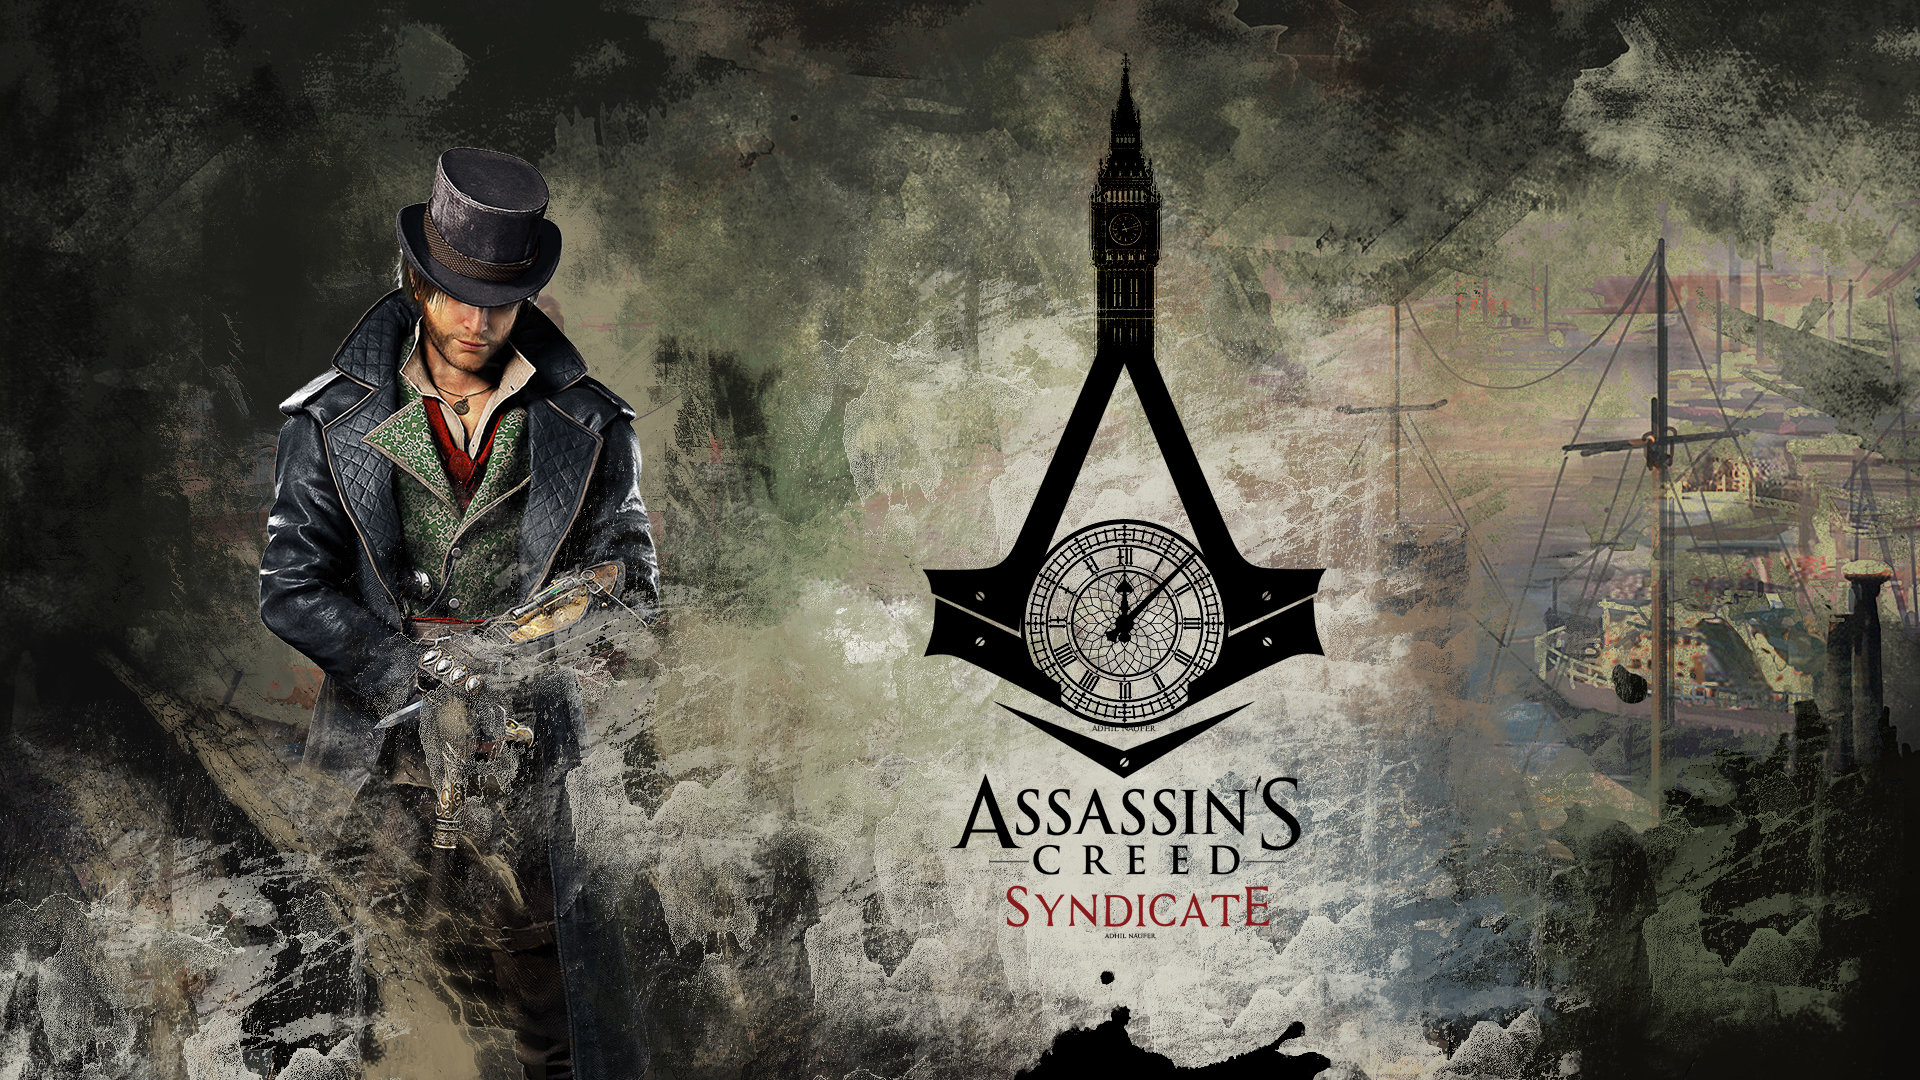 Assassins Creed Syndicate Wallpapers 1920x1080 Full Hd 1080p